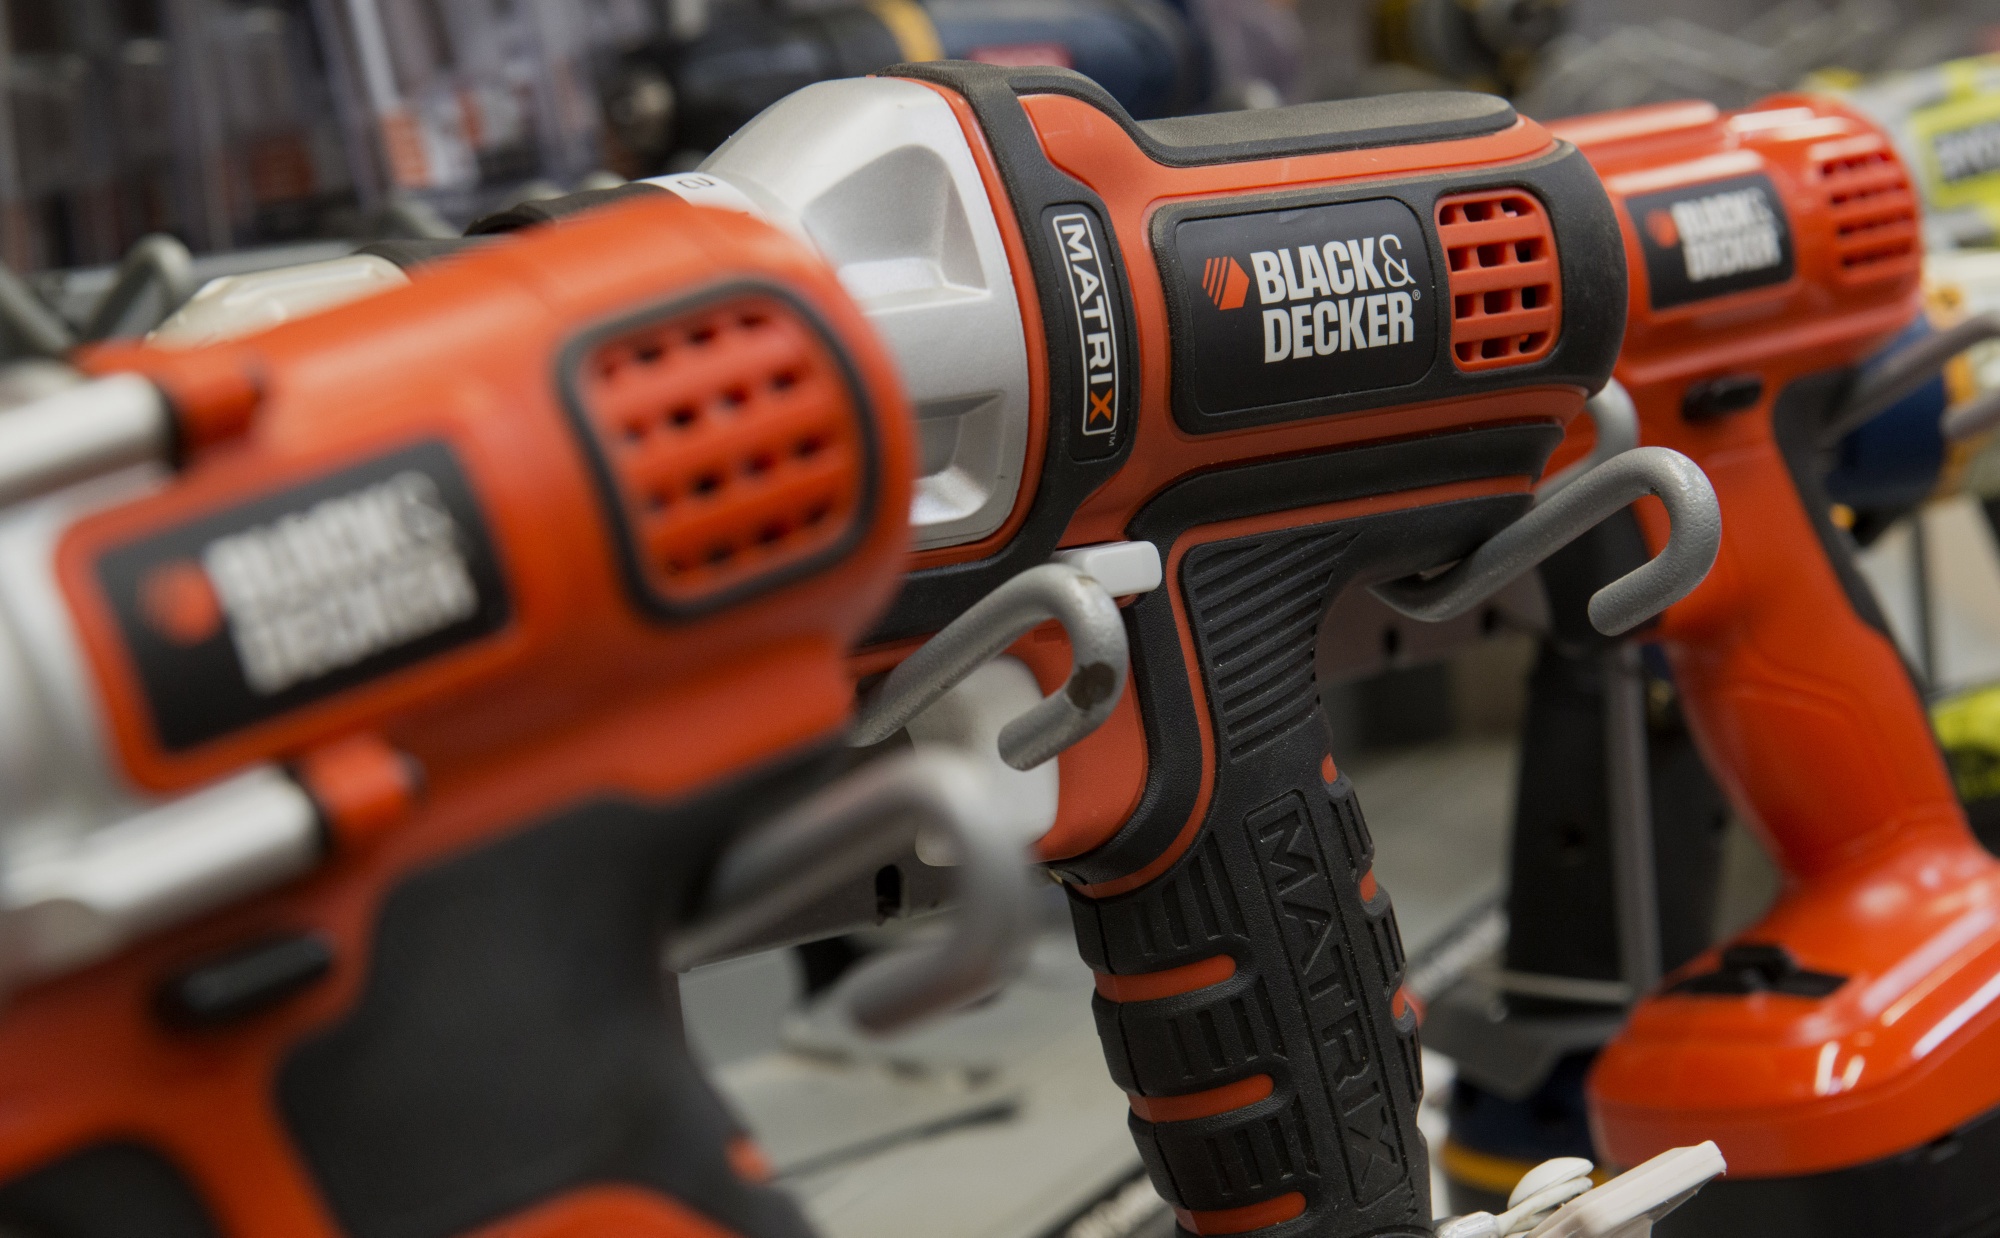 Stanley Black & Decker CEO: 'The tools business is on fire